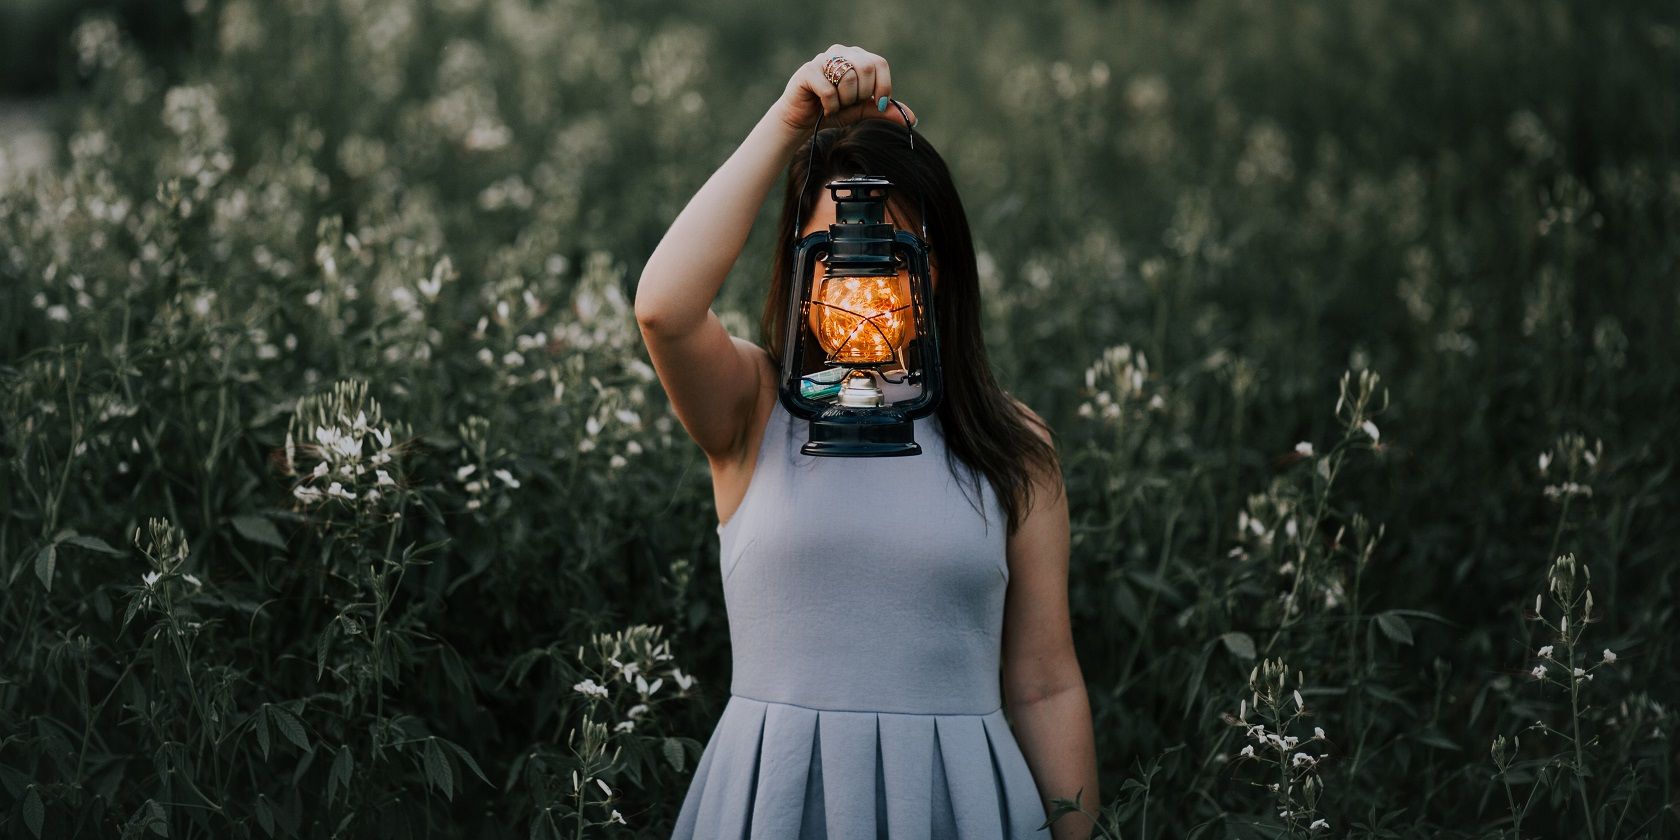 A lady holding a lantern with fireflies